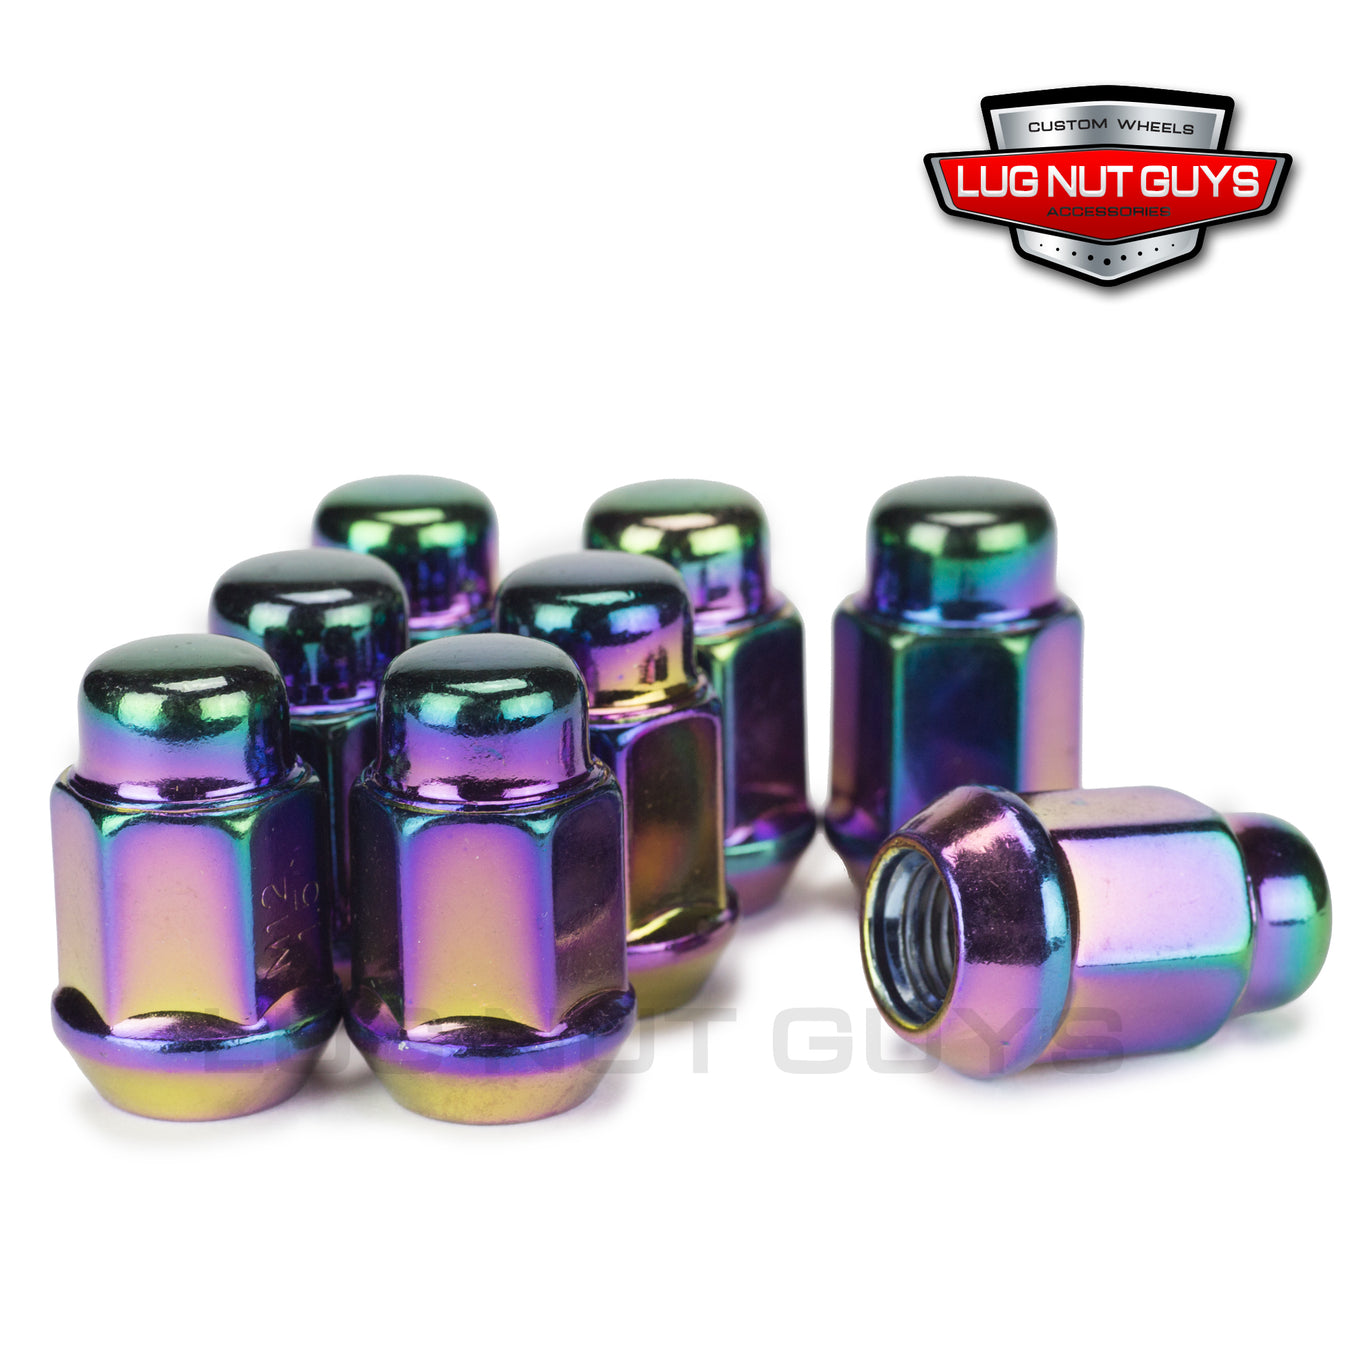 Shop for Neochrome Lug Nuts at lugnutguys.com 1/2-20 and 12x1.5 thread sizes. Spline and Bulge Acorn, cone seat style for aftermarket wheels.